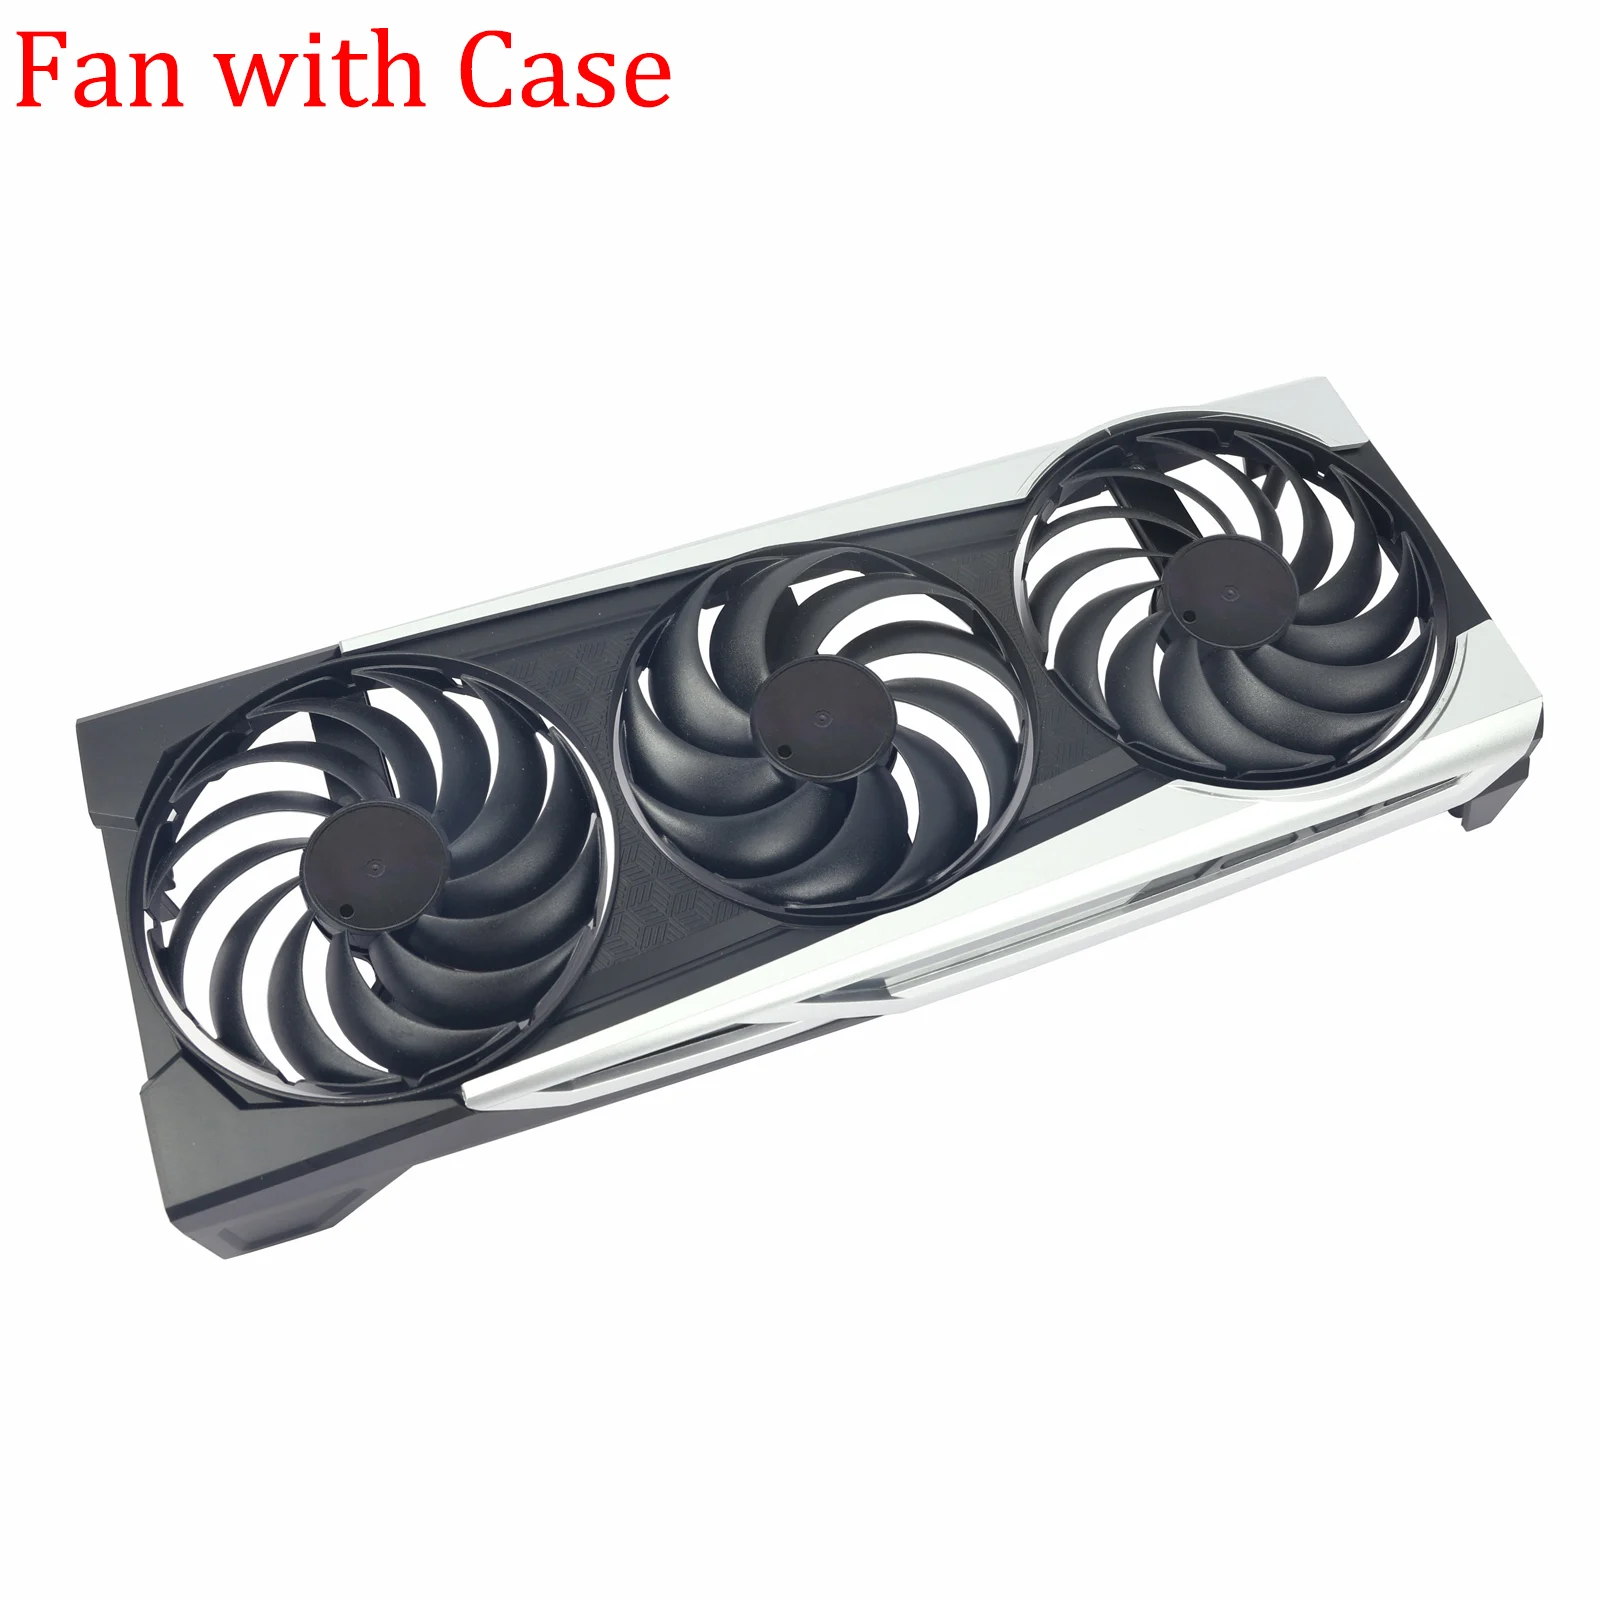 New 95MM FDC10U12D9-C RX6800 Cooler Fan For Sapphire NITRO+ AMD Radeon™ RX  6700 6800 6900 XT Graphics Card Replacement Fans